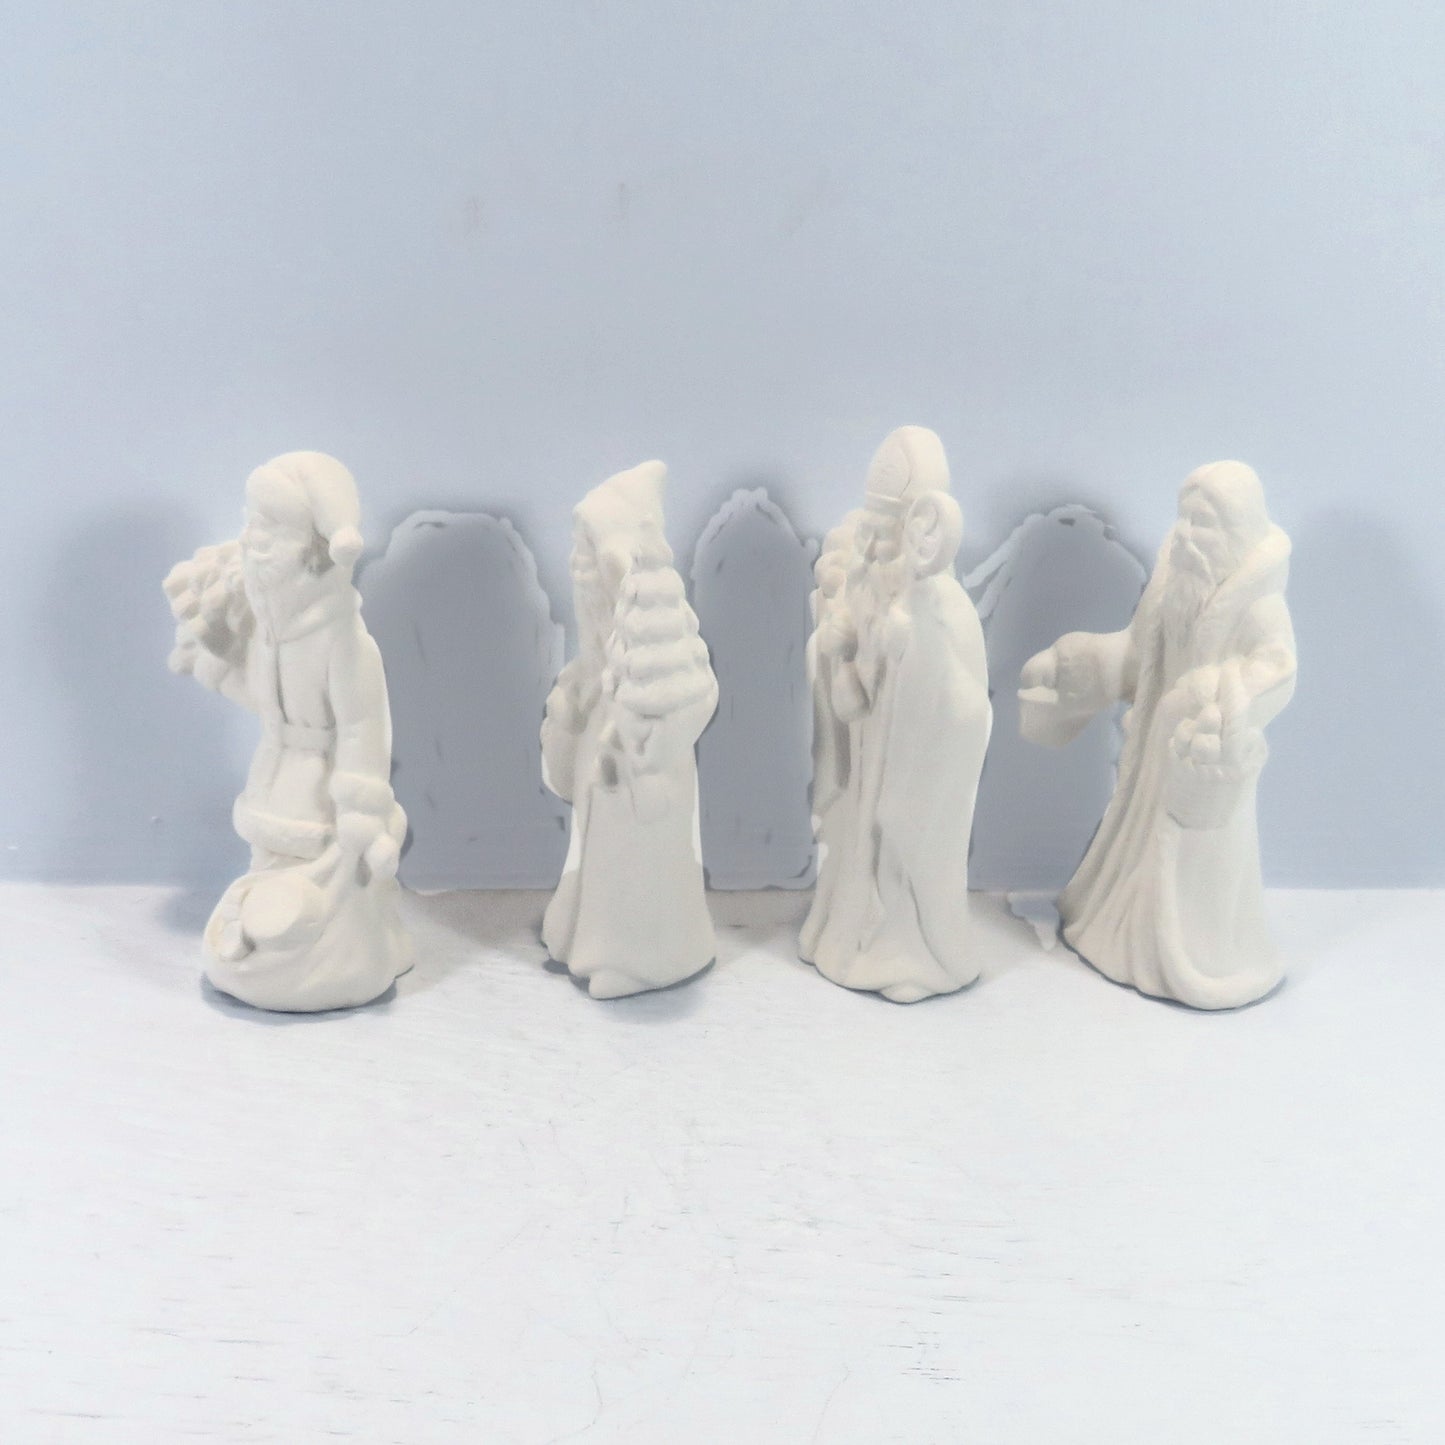 Handmade Set of 4 Ready to Paint Ceramic Santa Figurines for You to Paint for Christmas Decor